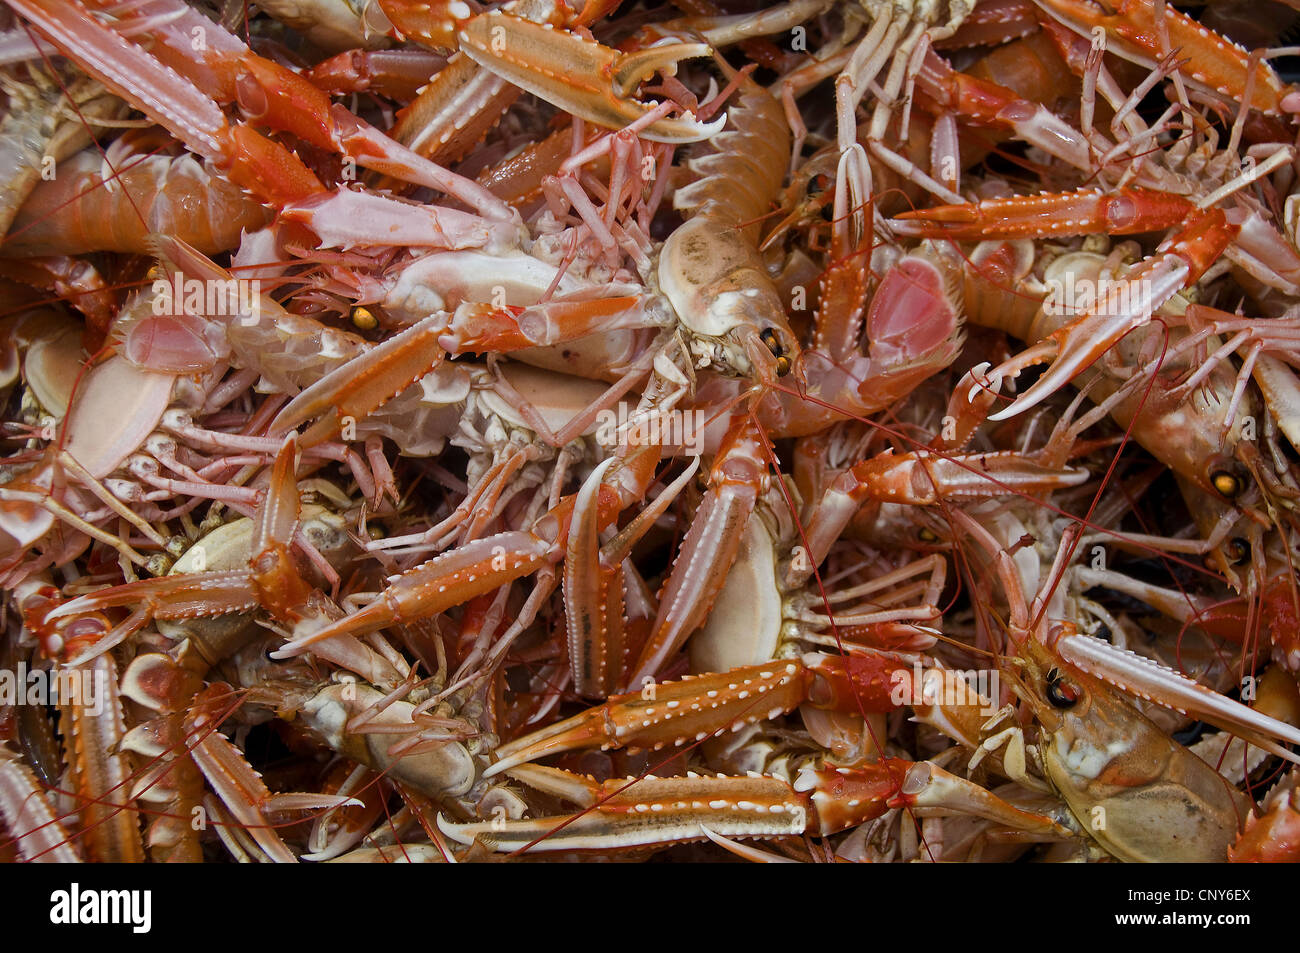 Norway lobster, Norway clawed lobster, Dublin Bay lobster, Dublin Bay prawn (scampi, langoustine) (Nephrops norvegicus), lots of fresh caught lobsters, Norway Stock Photo